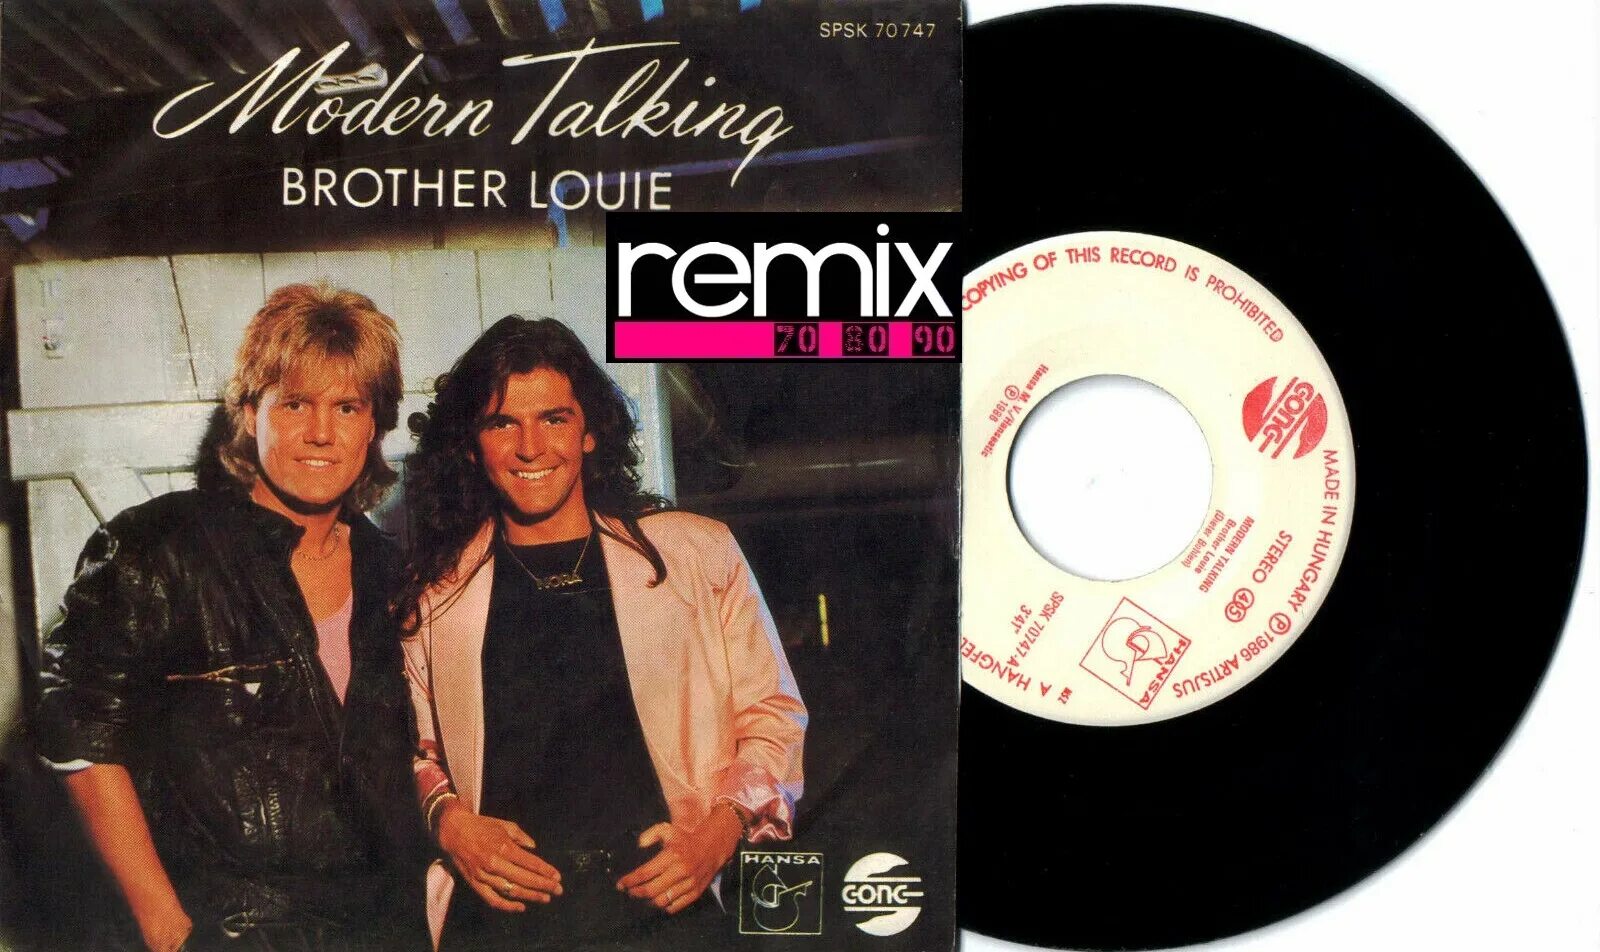 My brother talk to tom. Modern talking brother Louie 1986. Modern talking brother Louie обложка. Modern talking Постер. Modern talking brother.